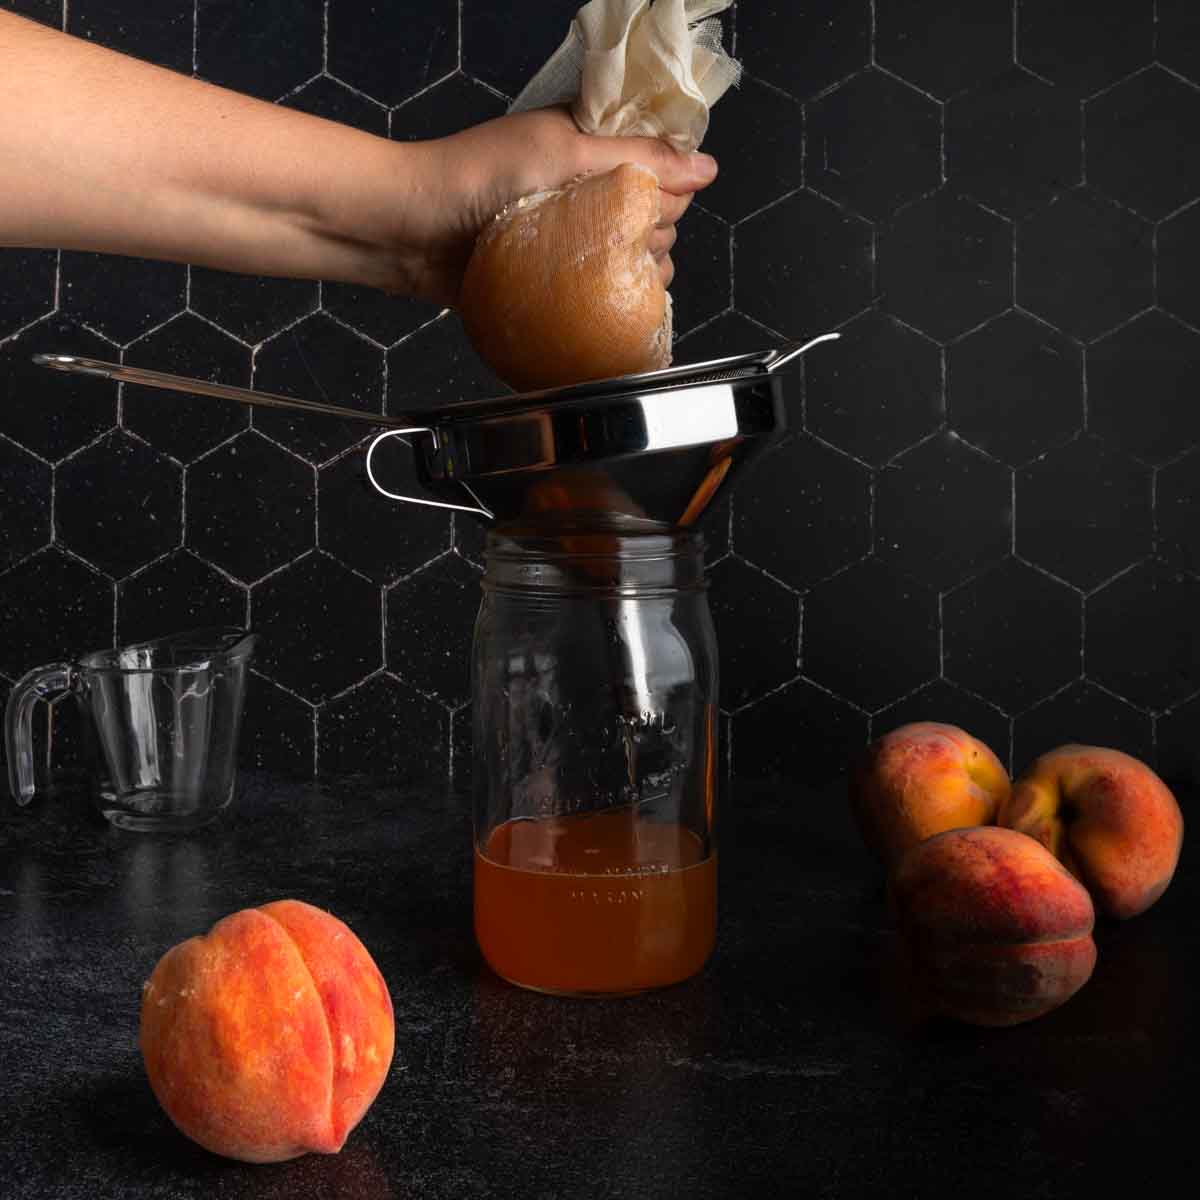 Squeezing the cheesecloth full of peaches over the jar of syrup.